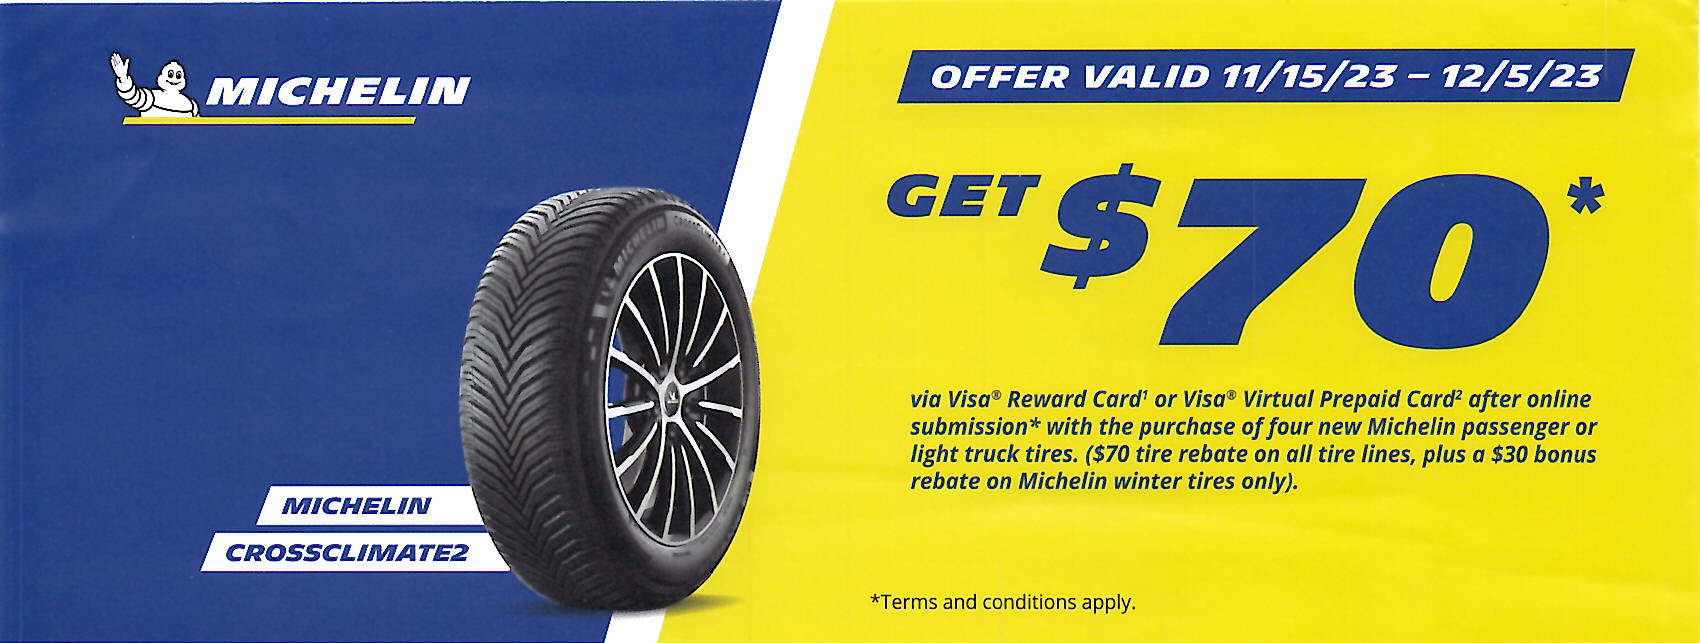 Get $70 when you purchase a set of 4 qualifying Michelin tires